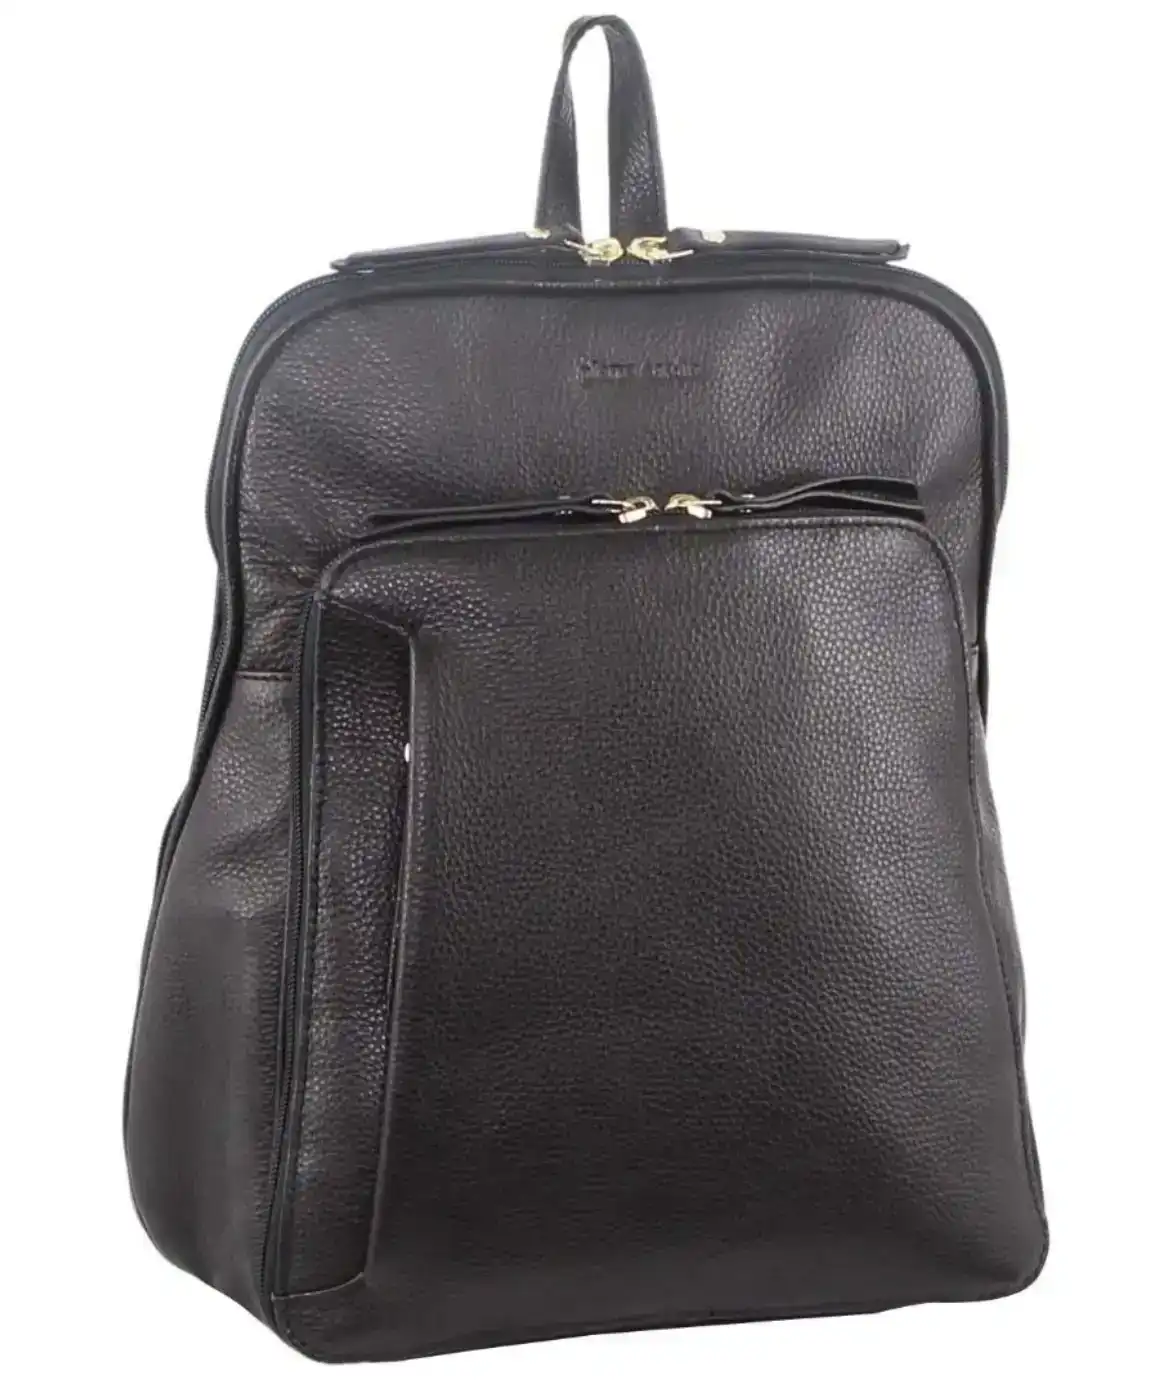 Pierre Cardin Women's Leather Backpack Bag with Pocket Front Multi-Zip - Black